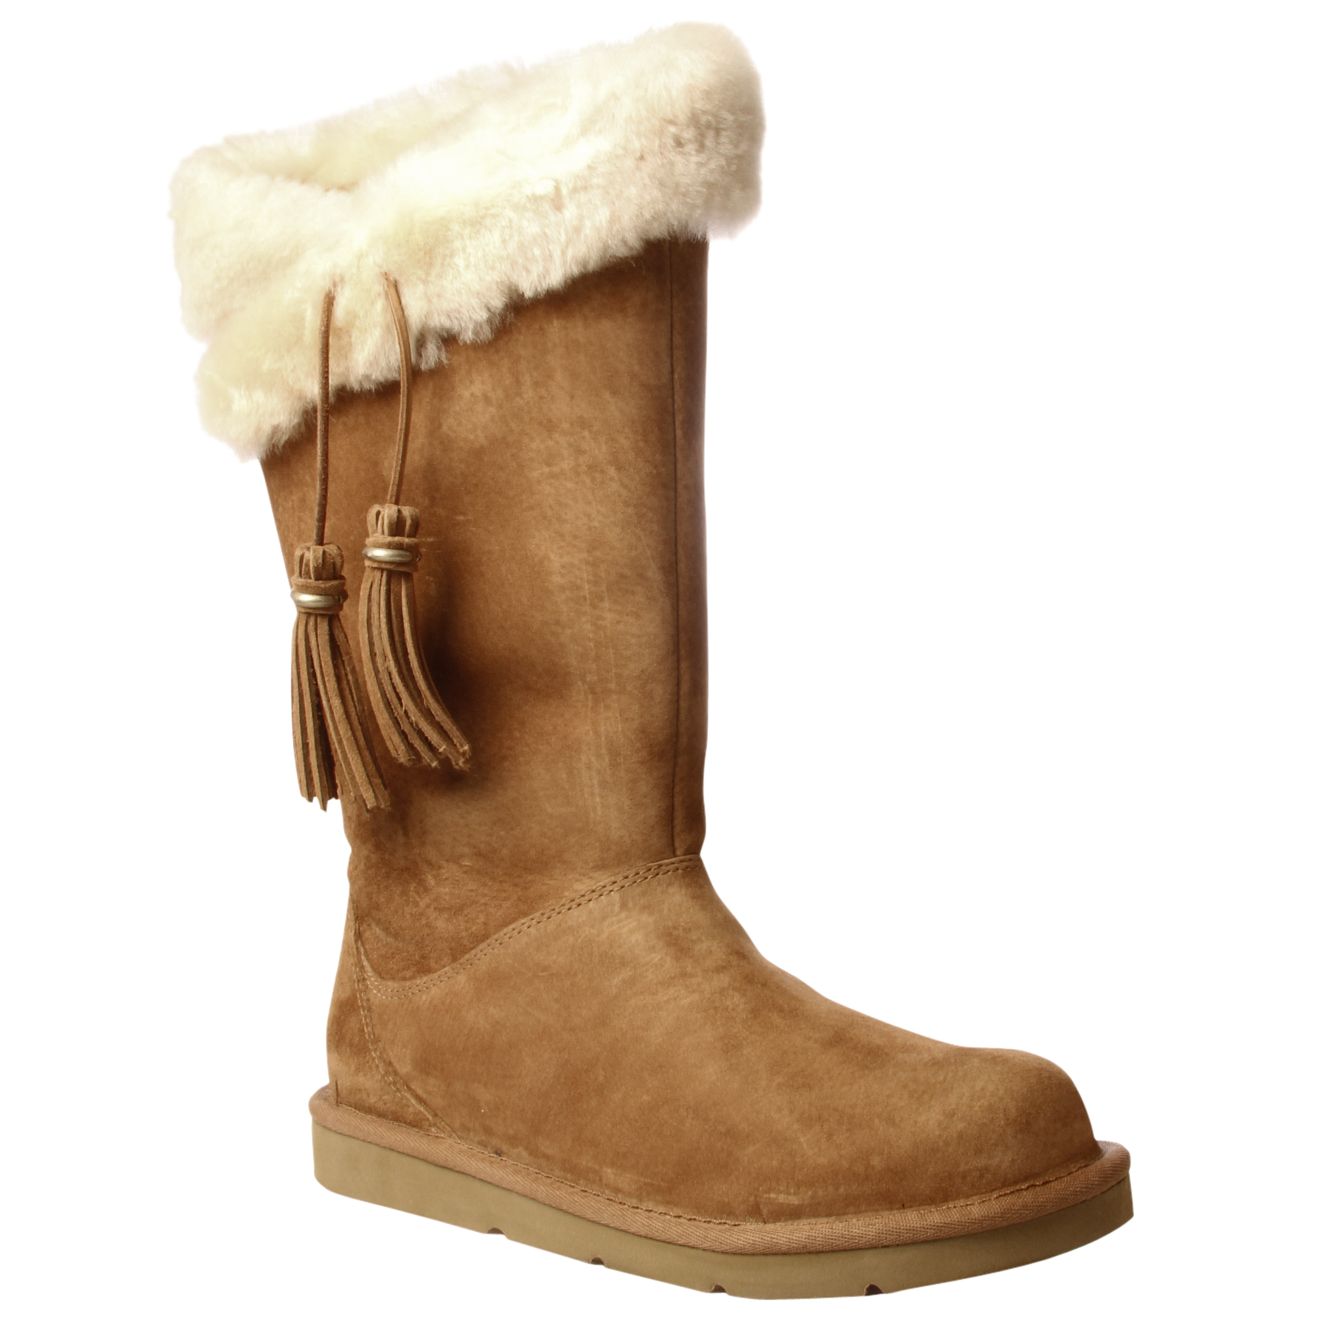 Ugg Plumdale Tall Boots, Chestnut at John Lewis